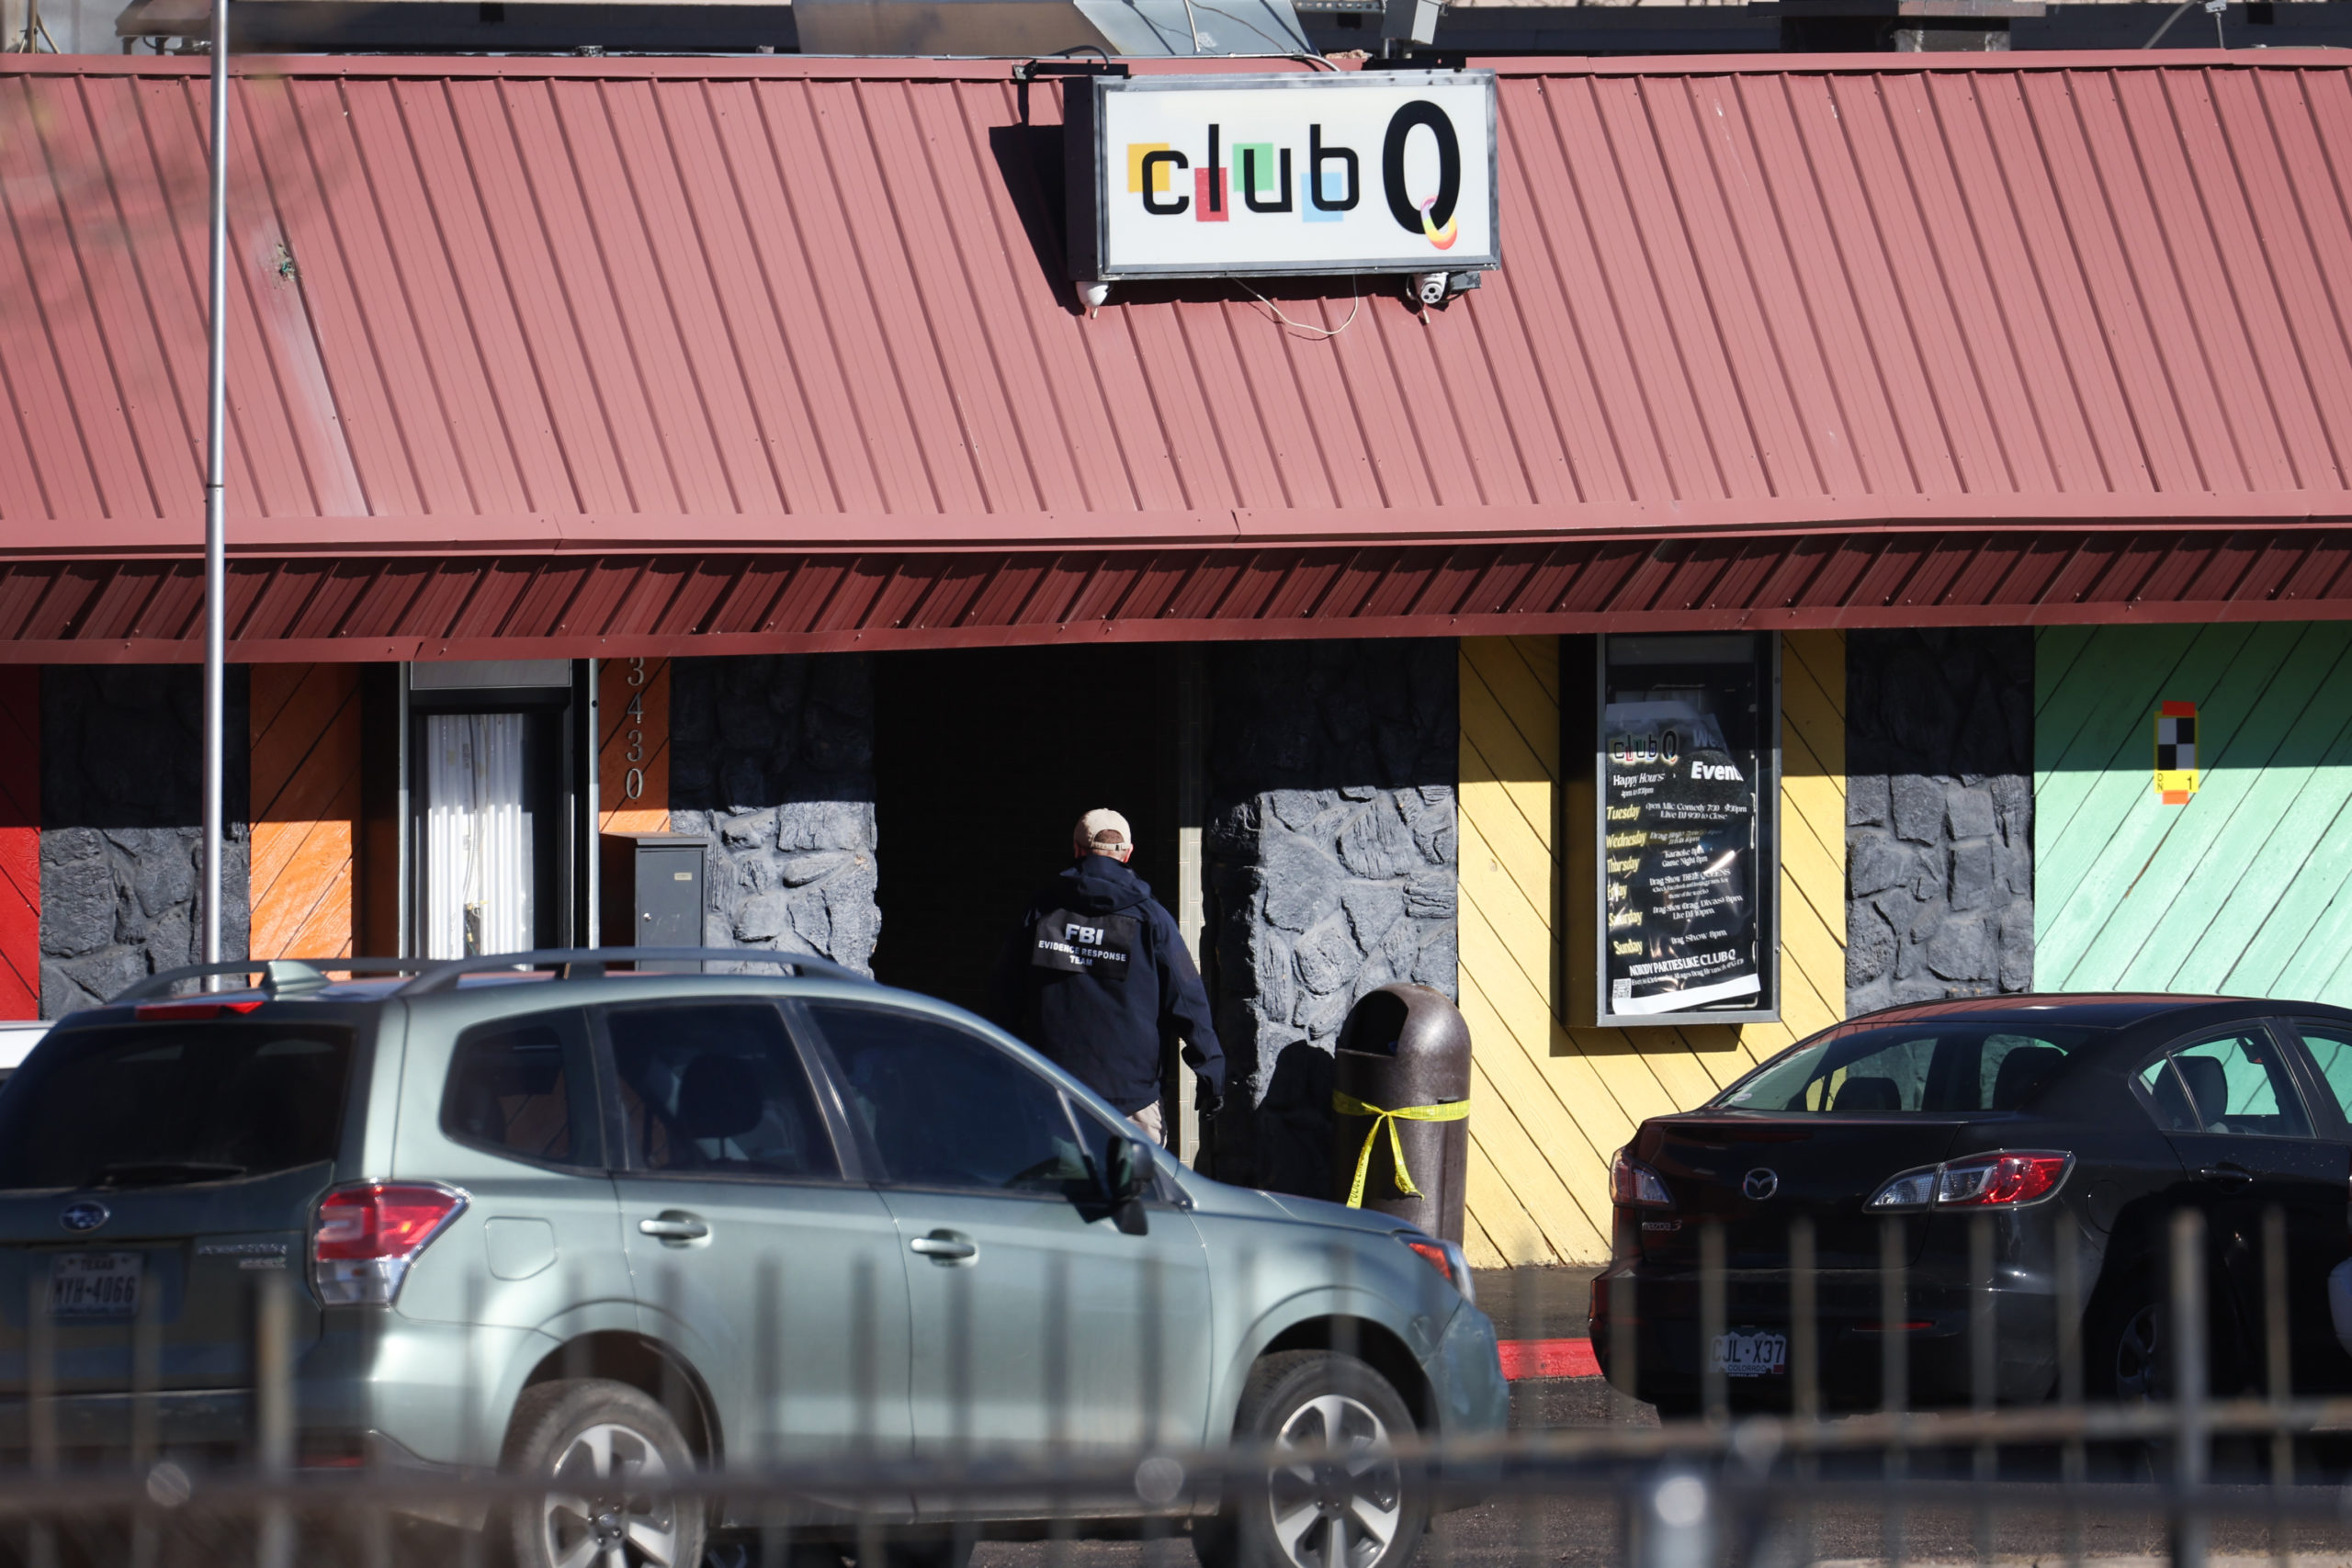 COLORADO SPRINGS, COLORADO - NOVEMBER 21: Law enforcement officials continue their investigation into Saturday's shooting at the Club Q nightclub on November 21, 2022 in Colorado Springs, Colorado. On Saturday evening, a 22-year-old gunman entered the LGBTQ nightclub opened fire, killing at least five people and injuring 25 others before being stopped by club patrons. (Photo by Scott Olson/Getty Images)